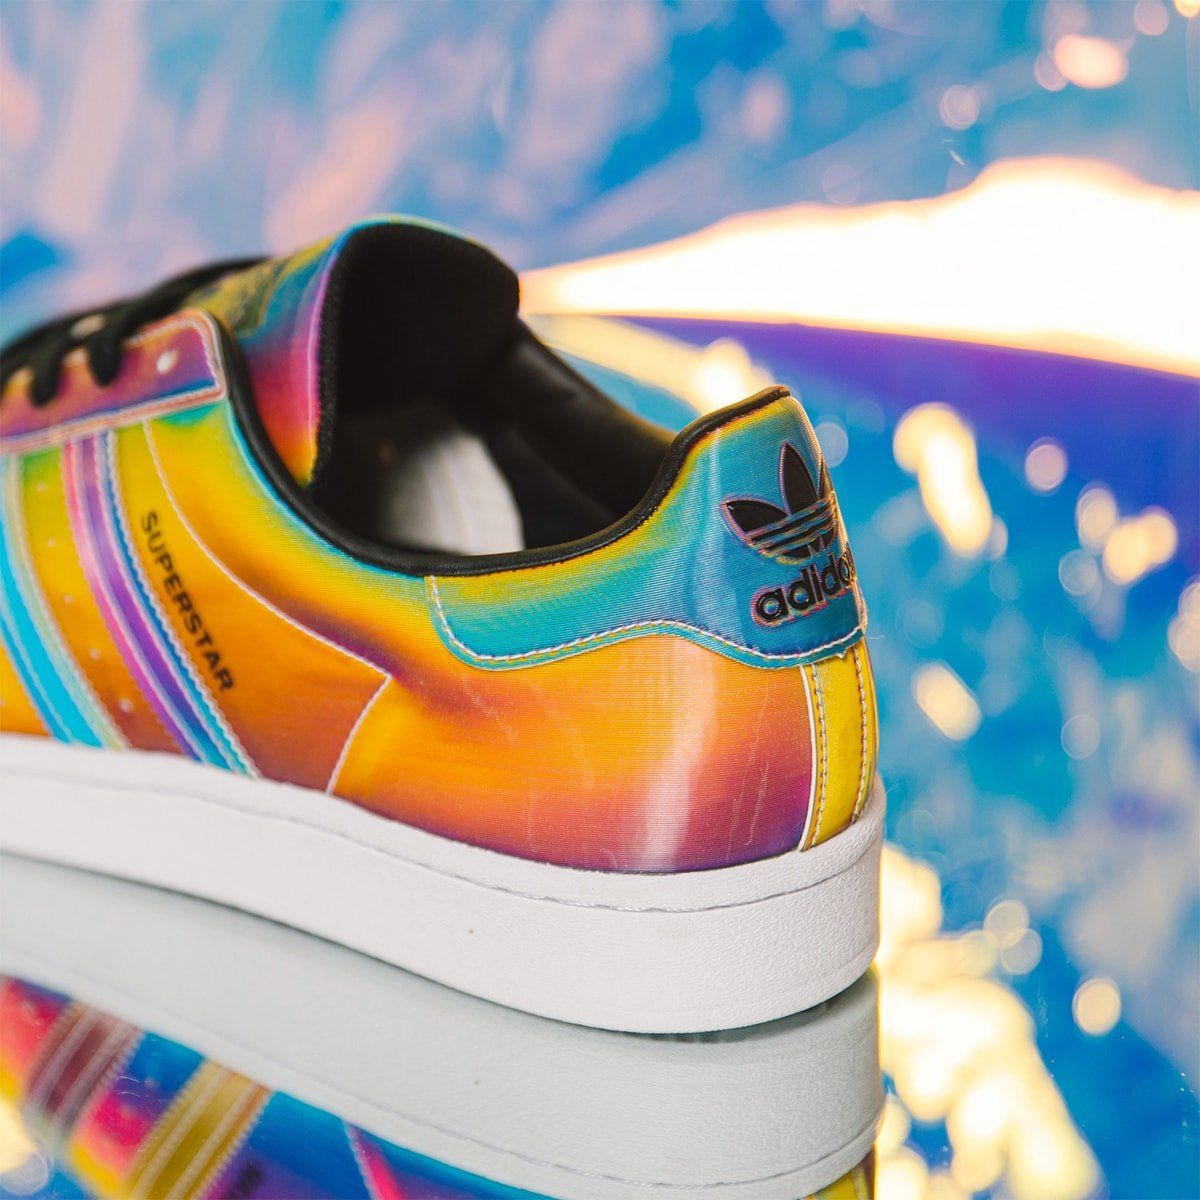 opdagelse Utilfreds plantageejer The adidas Superstar Appears in "Rainbow Iridescent" | HOUSE OF HEAT